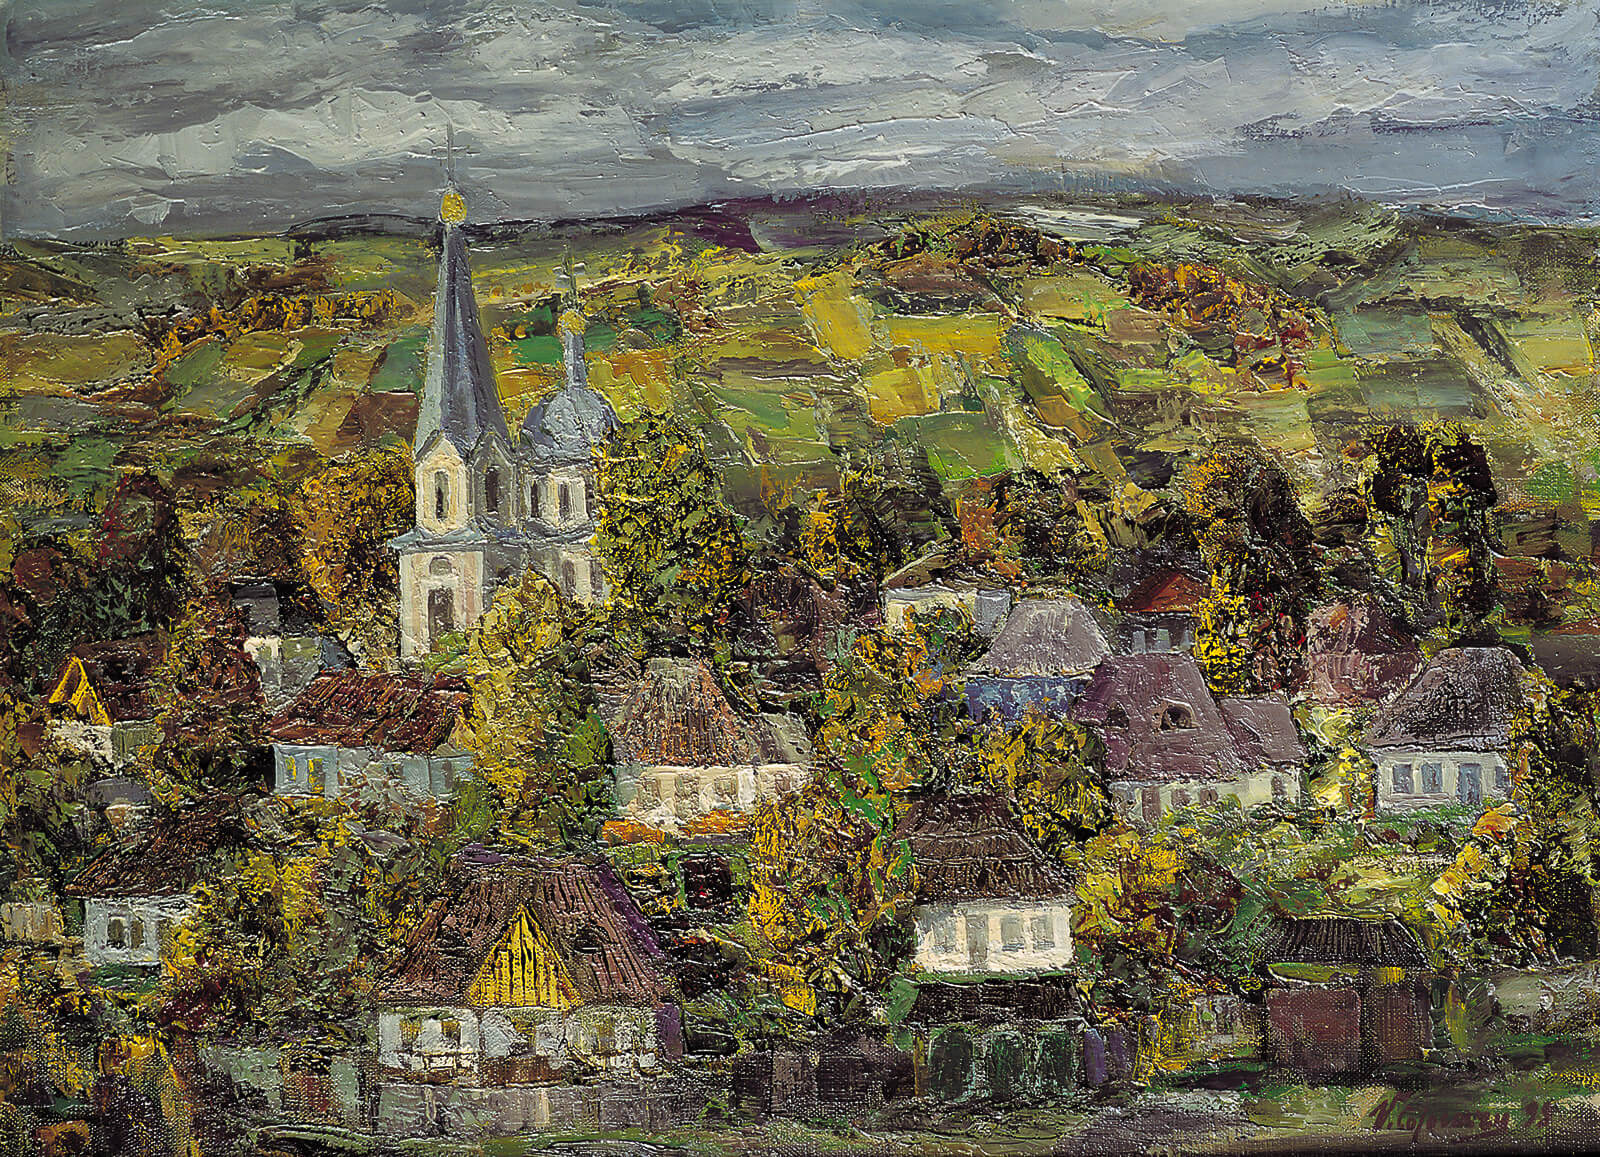 Autumn. The Village of Pituşca. Painting by Vasile cojocaru